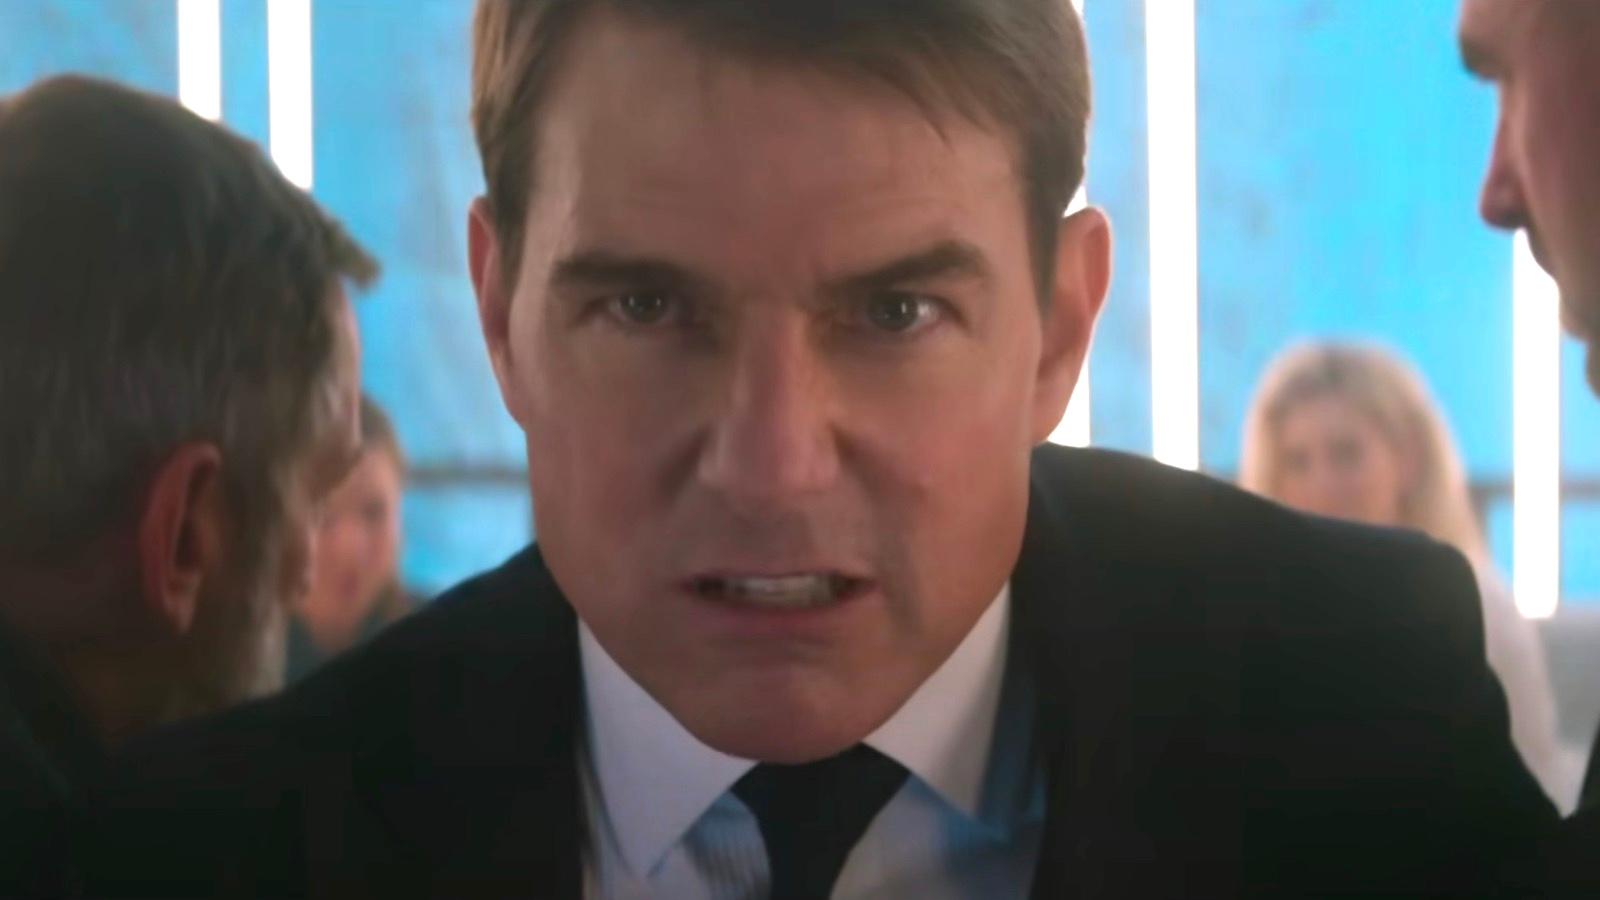 Tom Cruise in Mission Impossible 7 trailer